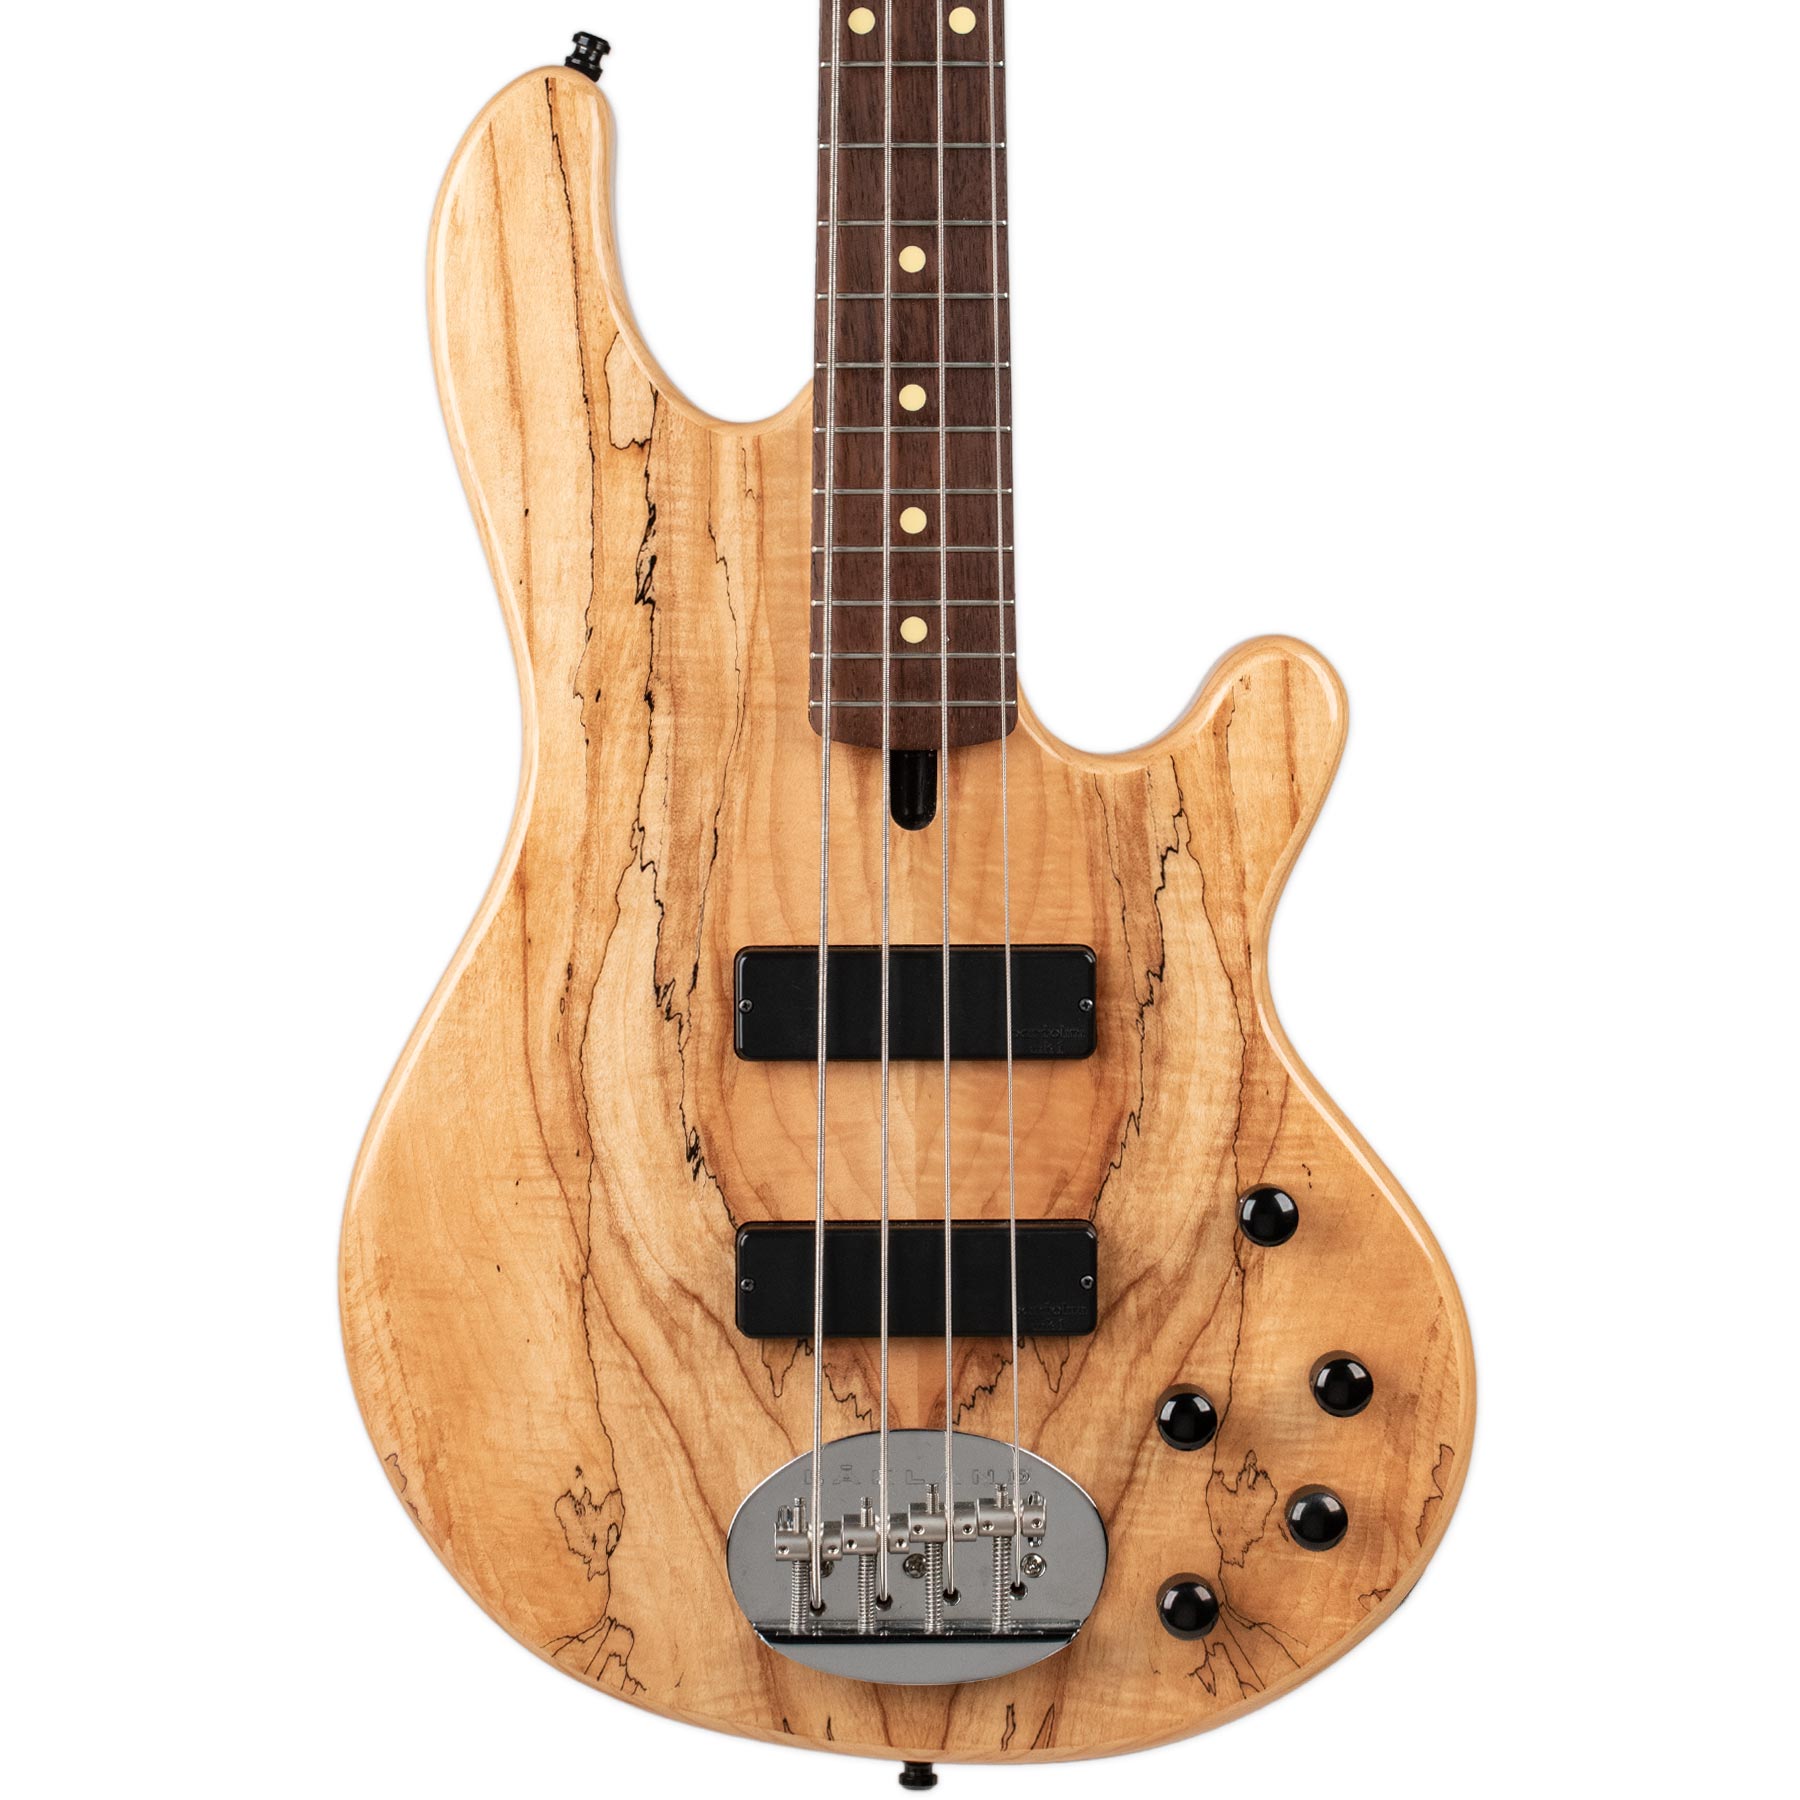 USED LAKLAND SKYLINE 44–01 DELUXE SPALTED BASS WITH CASE